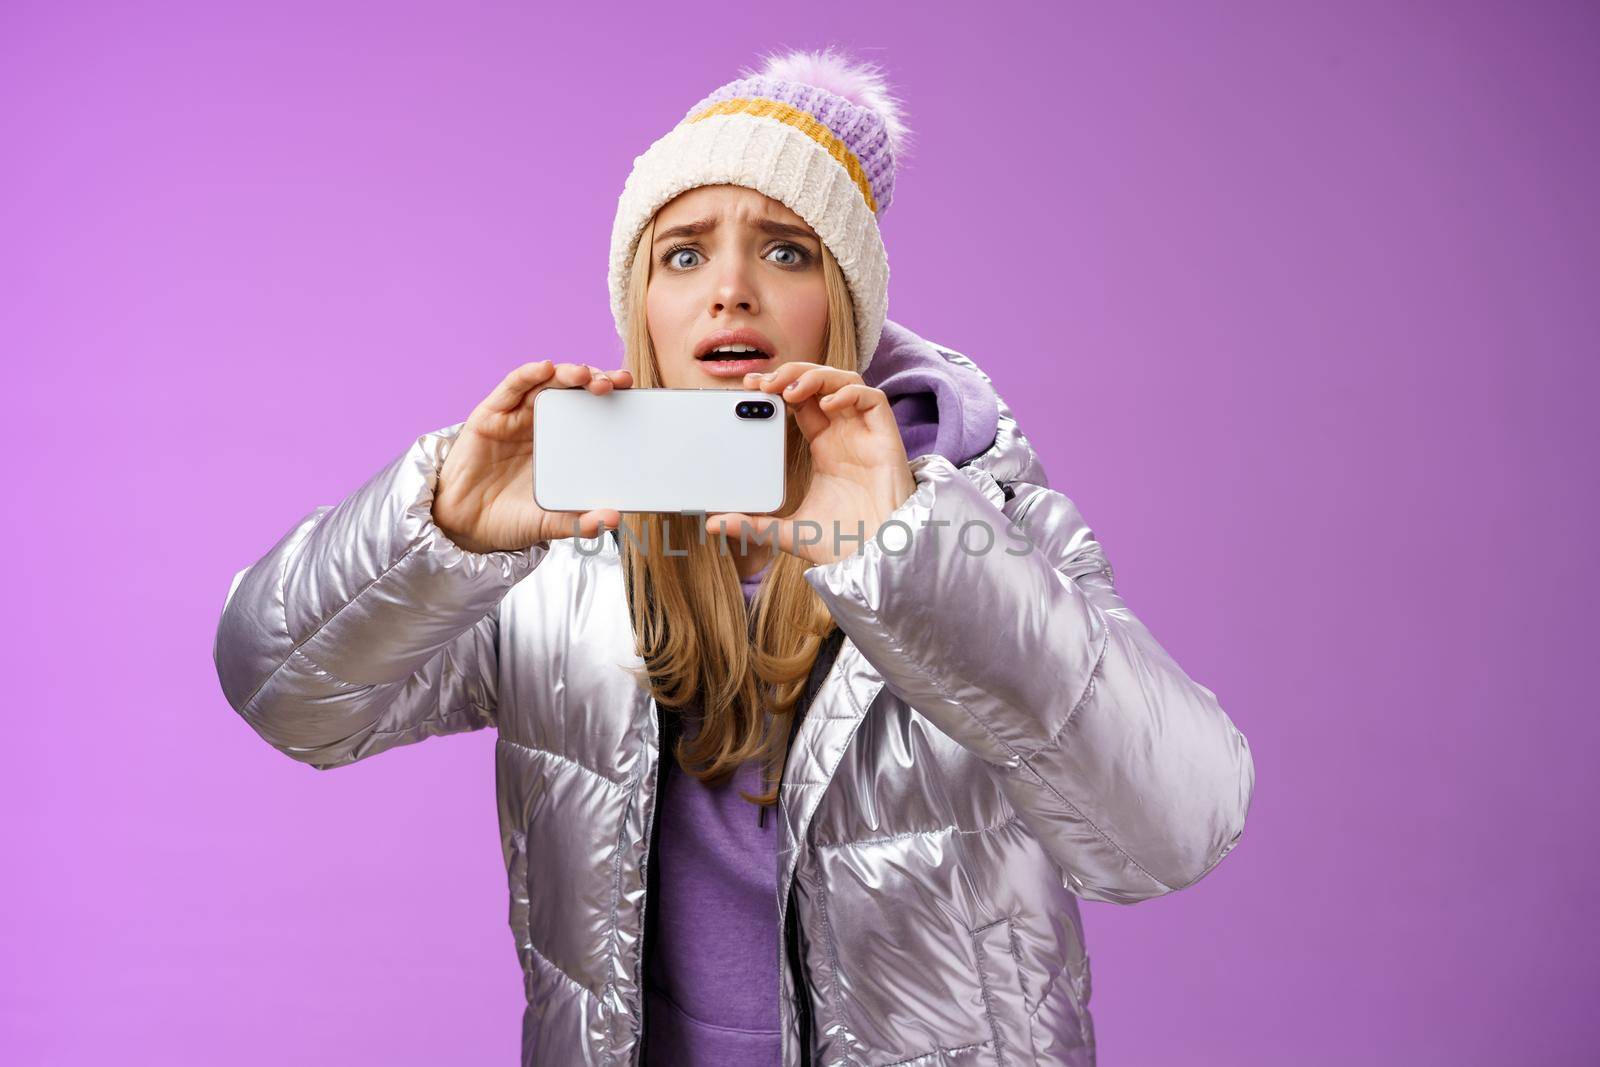 Intense worried blond girl holding mobile phone horizontal recording video capture moment share friends internet blog using smartphone camera shoot photograph standing serious purple background.